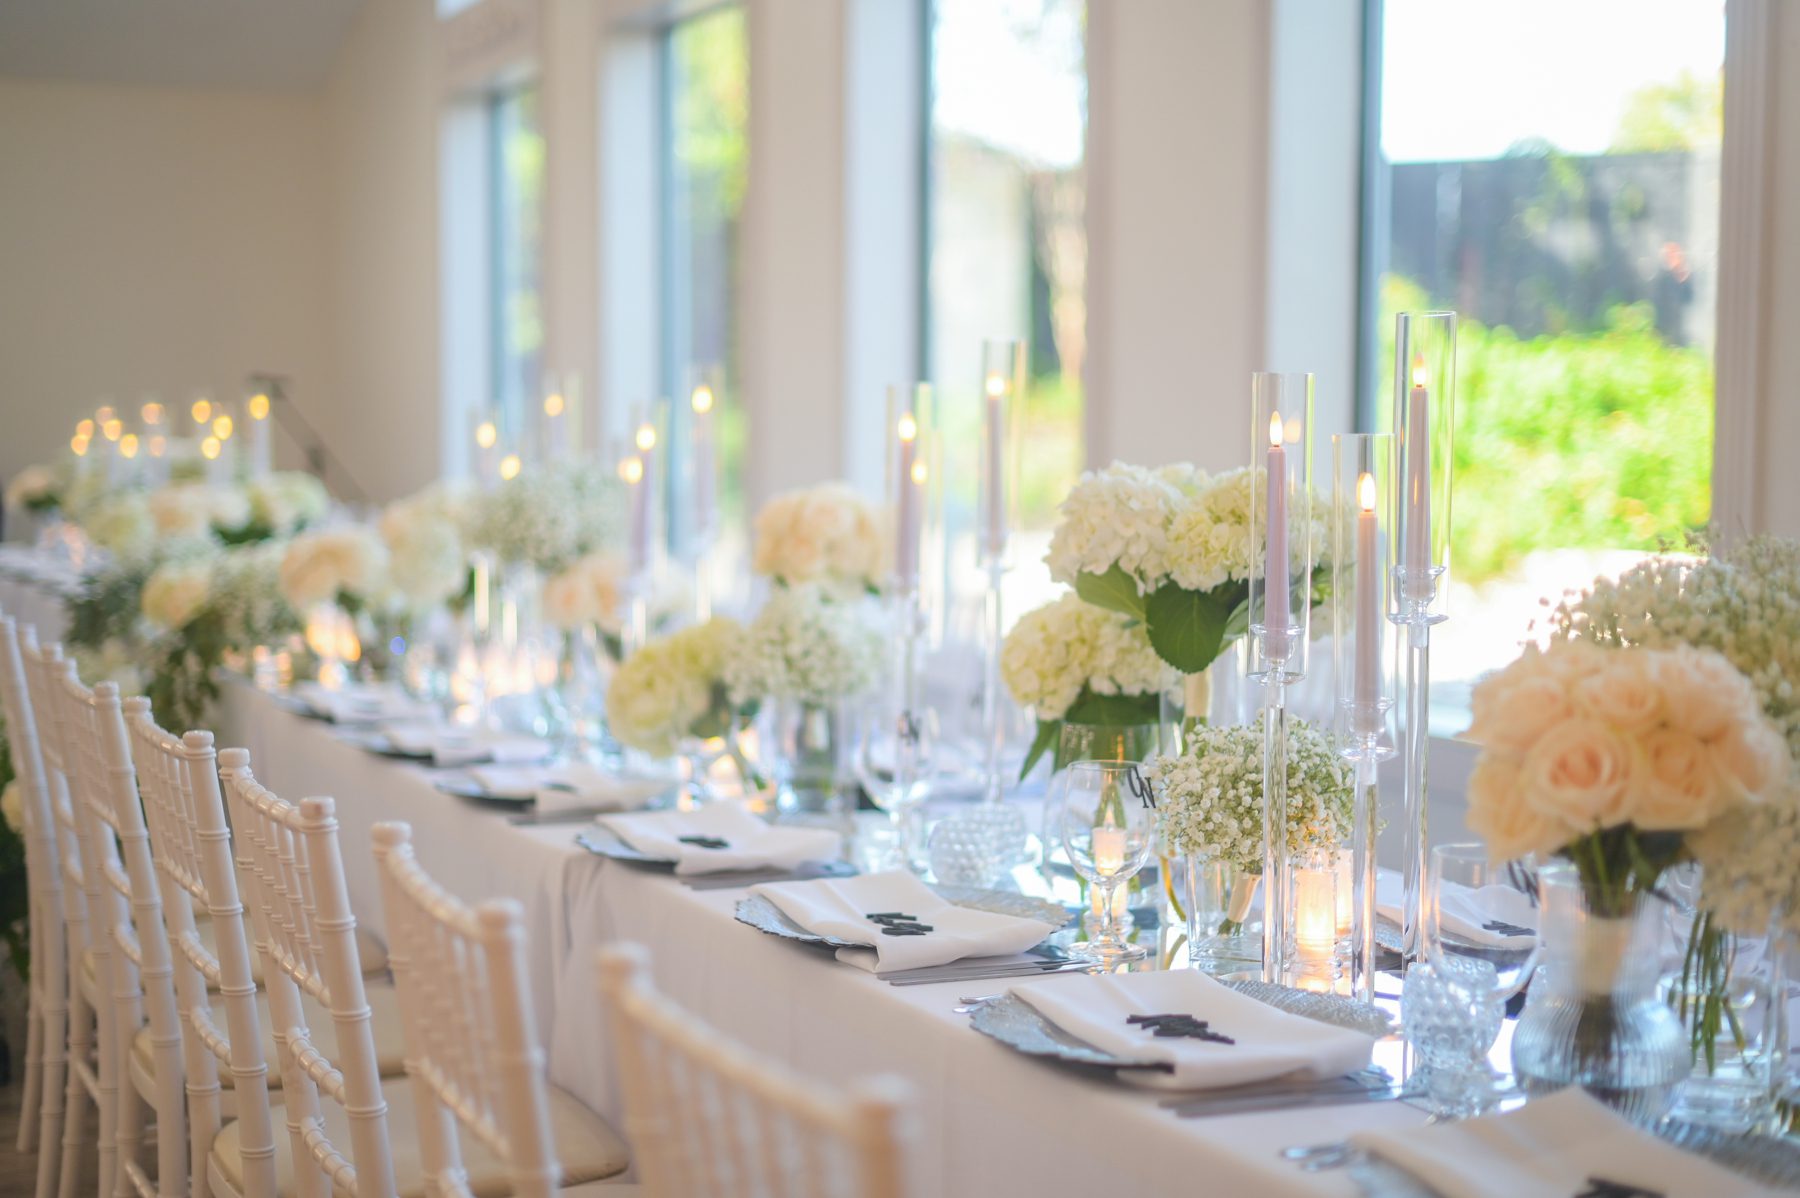 Reception table featuring white hydrangeas, white baby's breath, white candles, and white table linen at Brighton Abbey